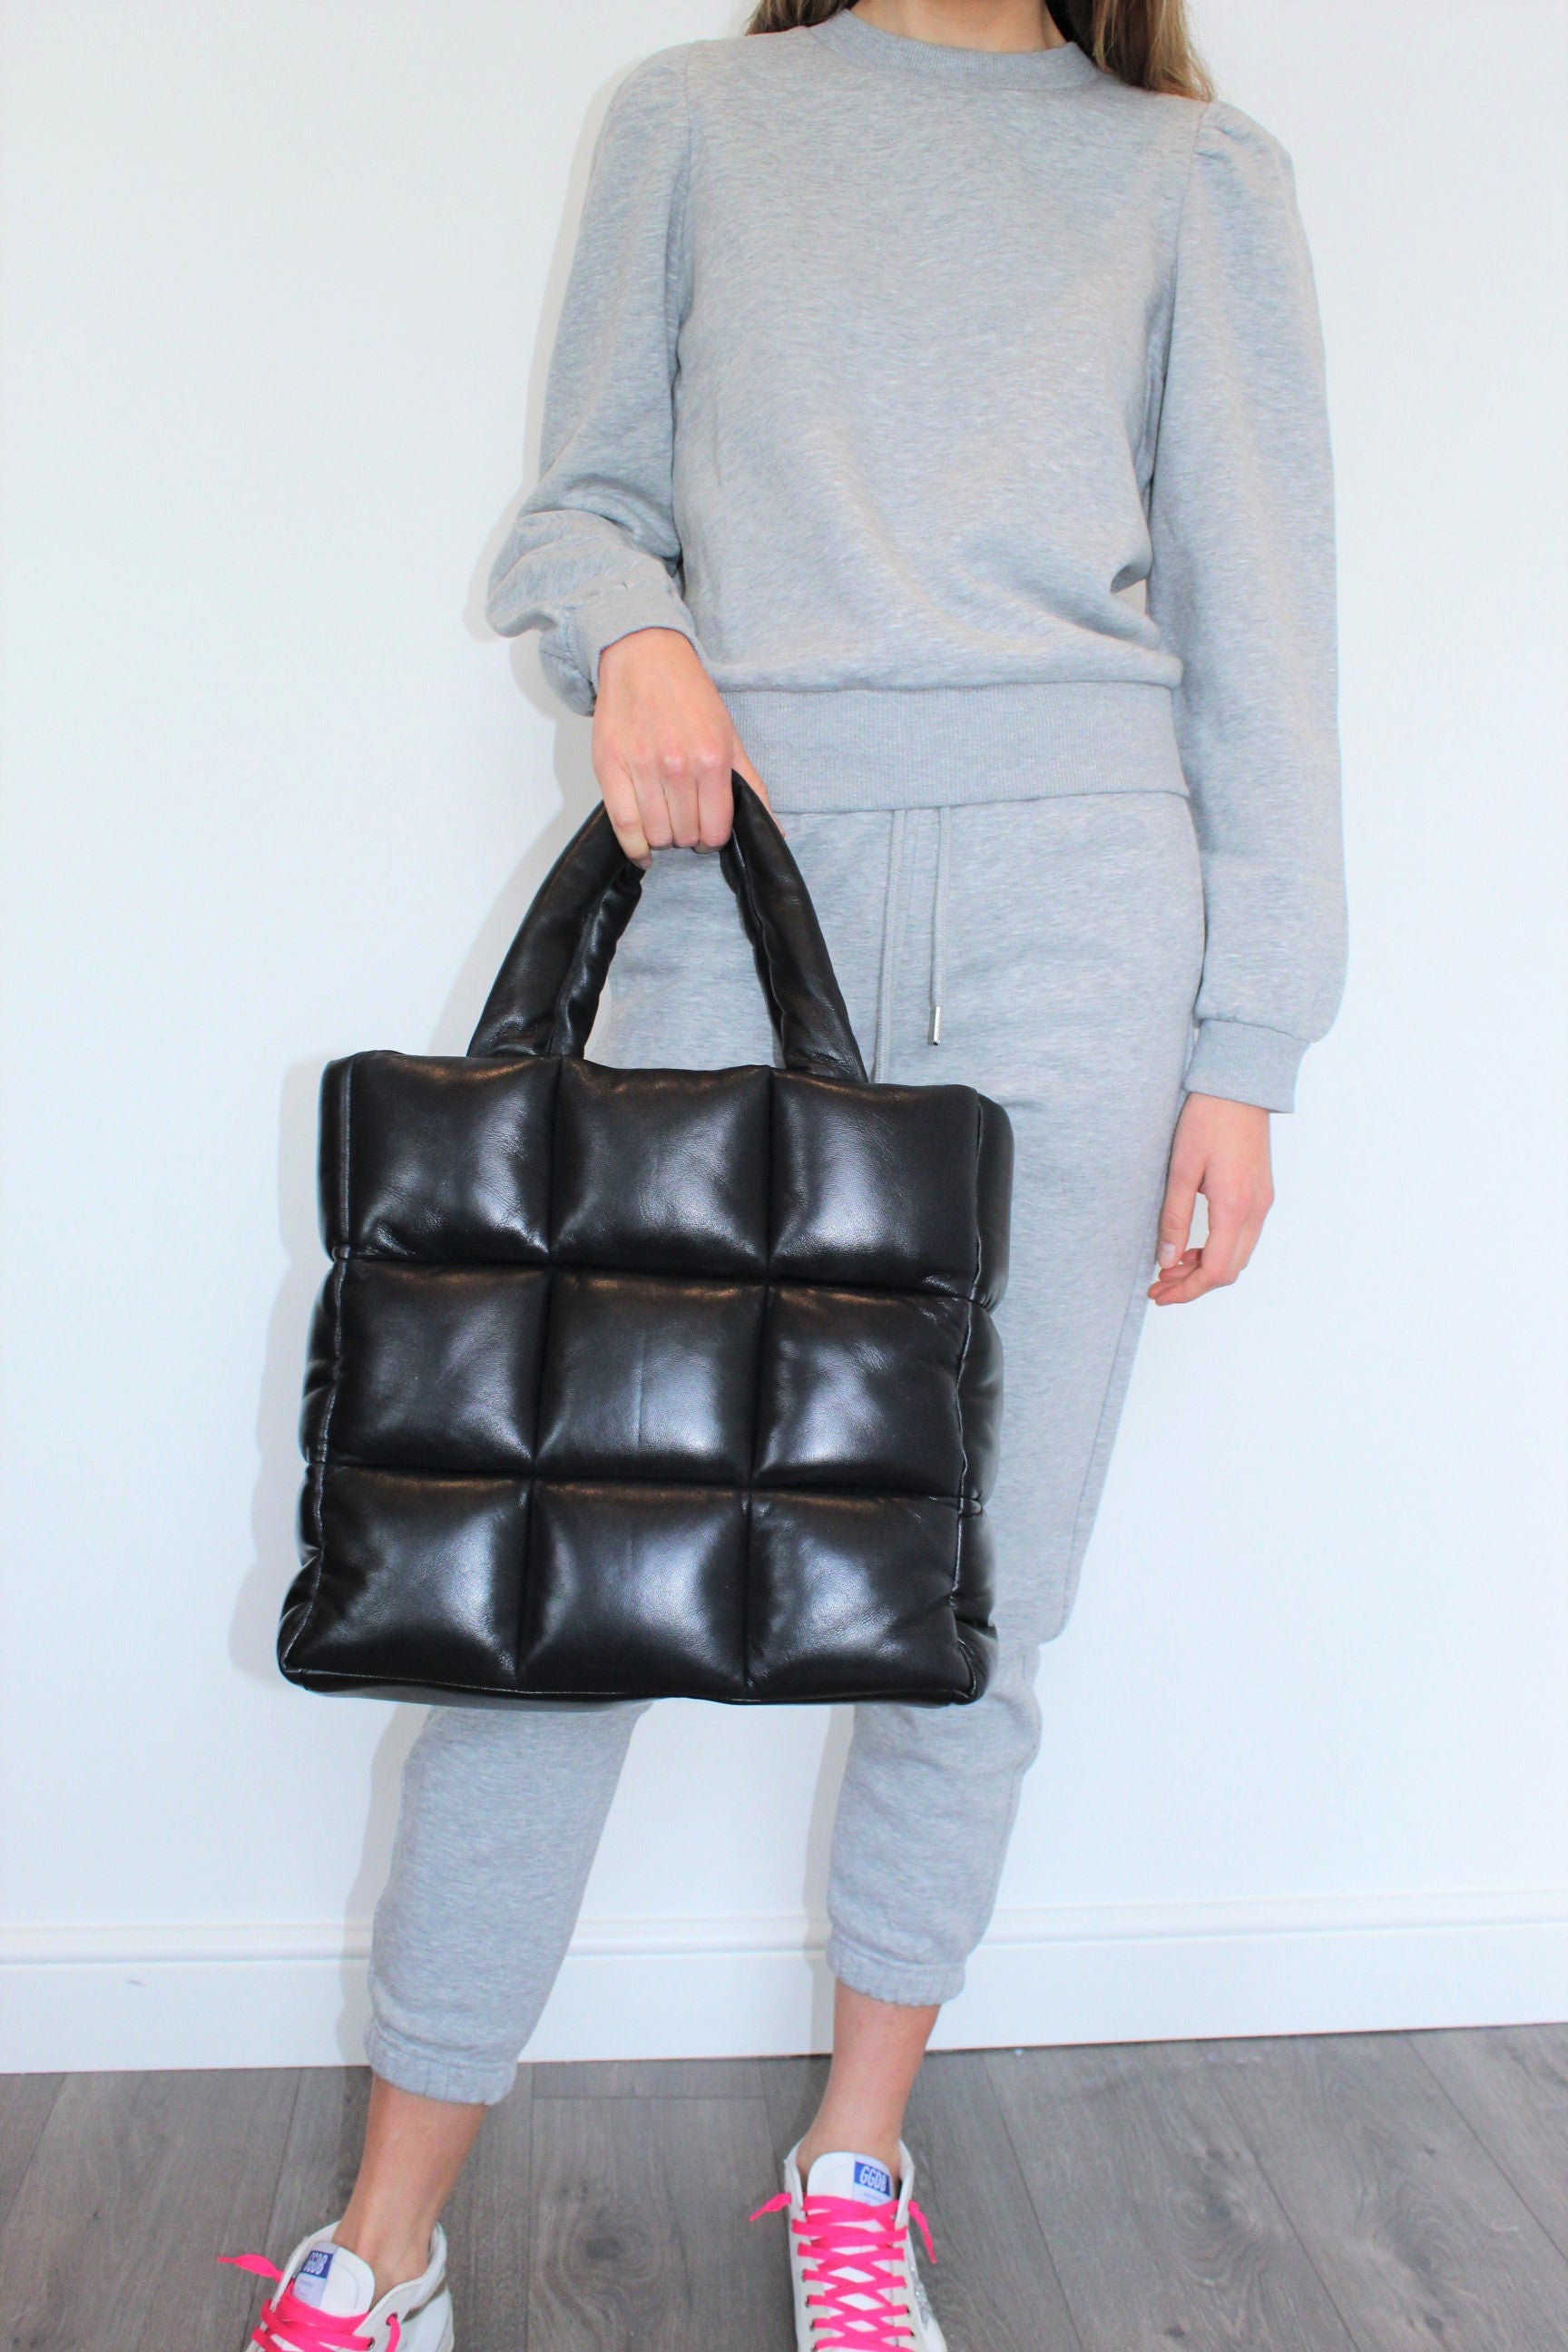 STAND Assante Puffy Bag in Black